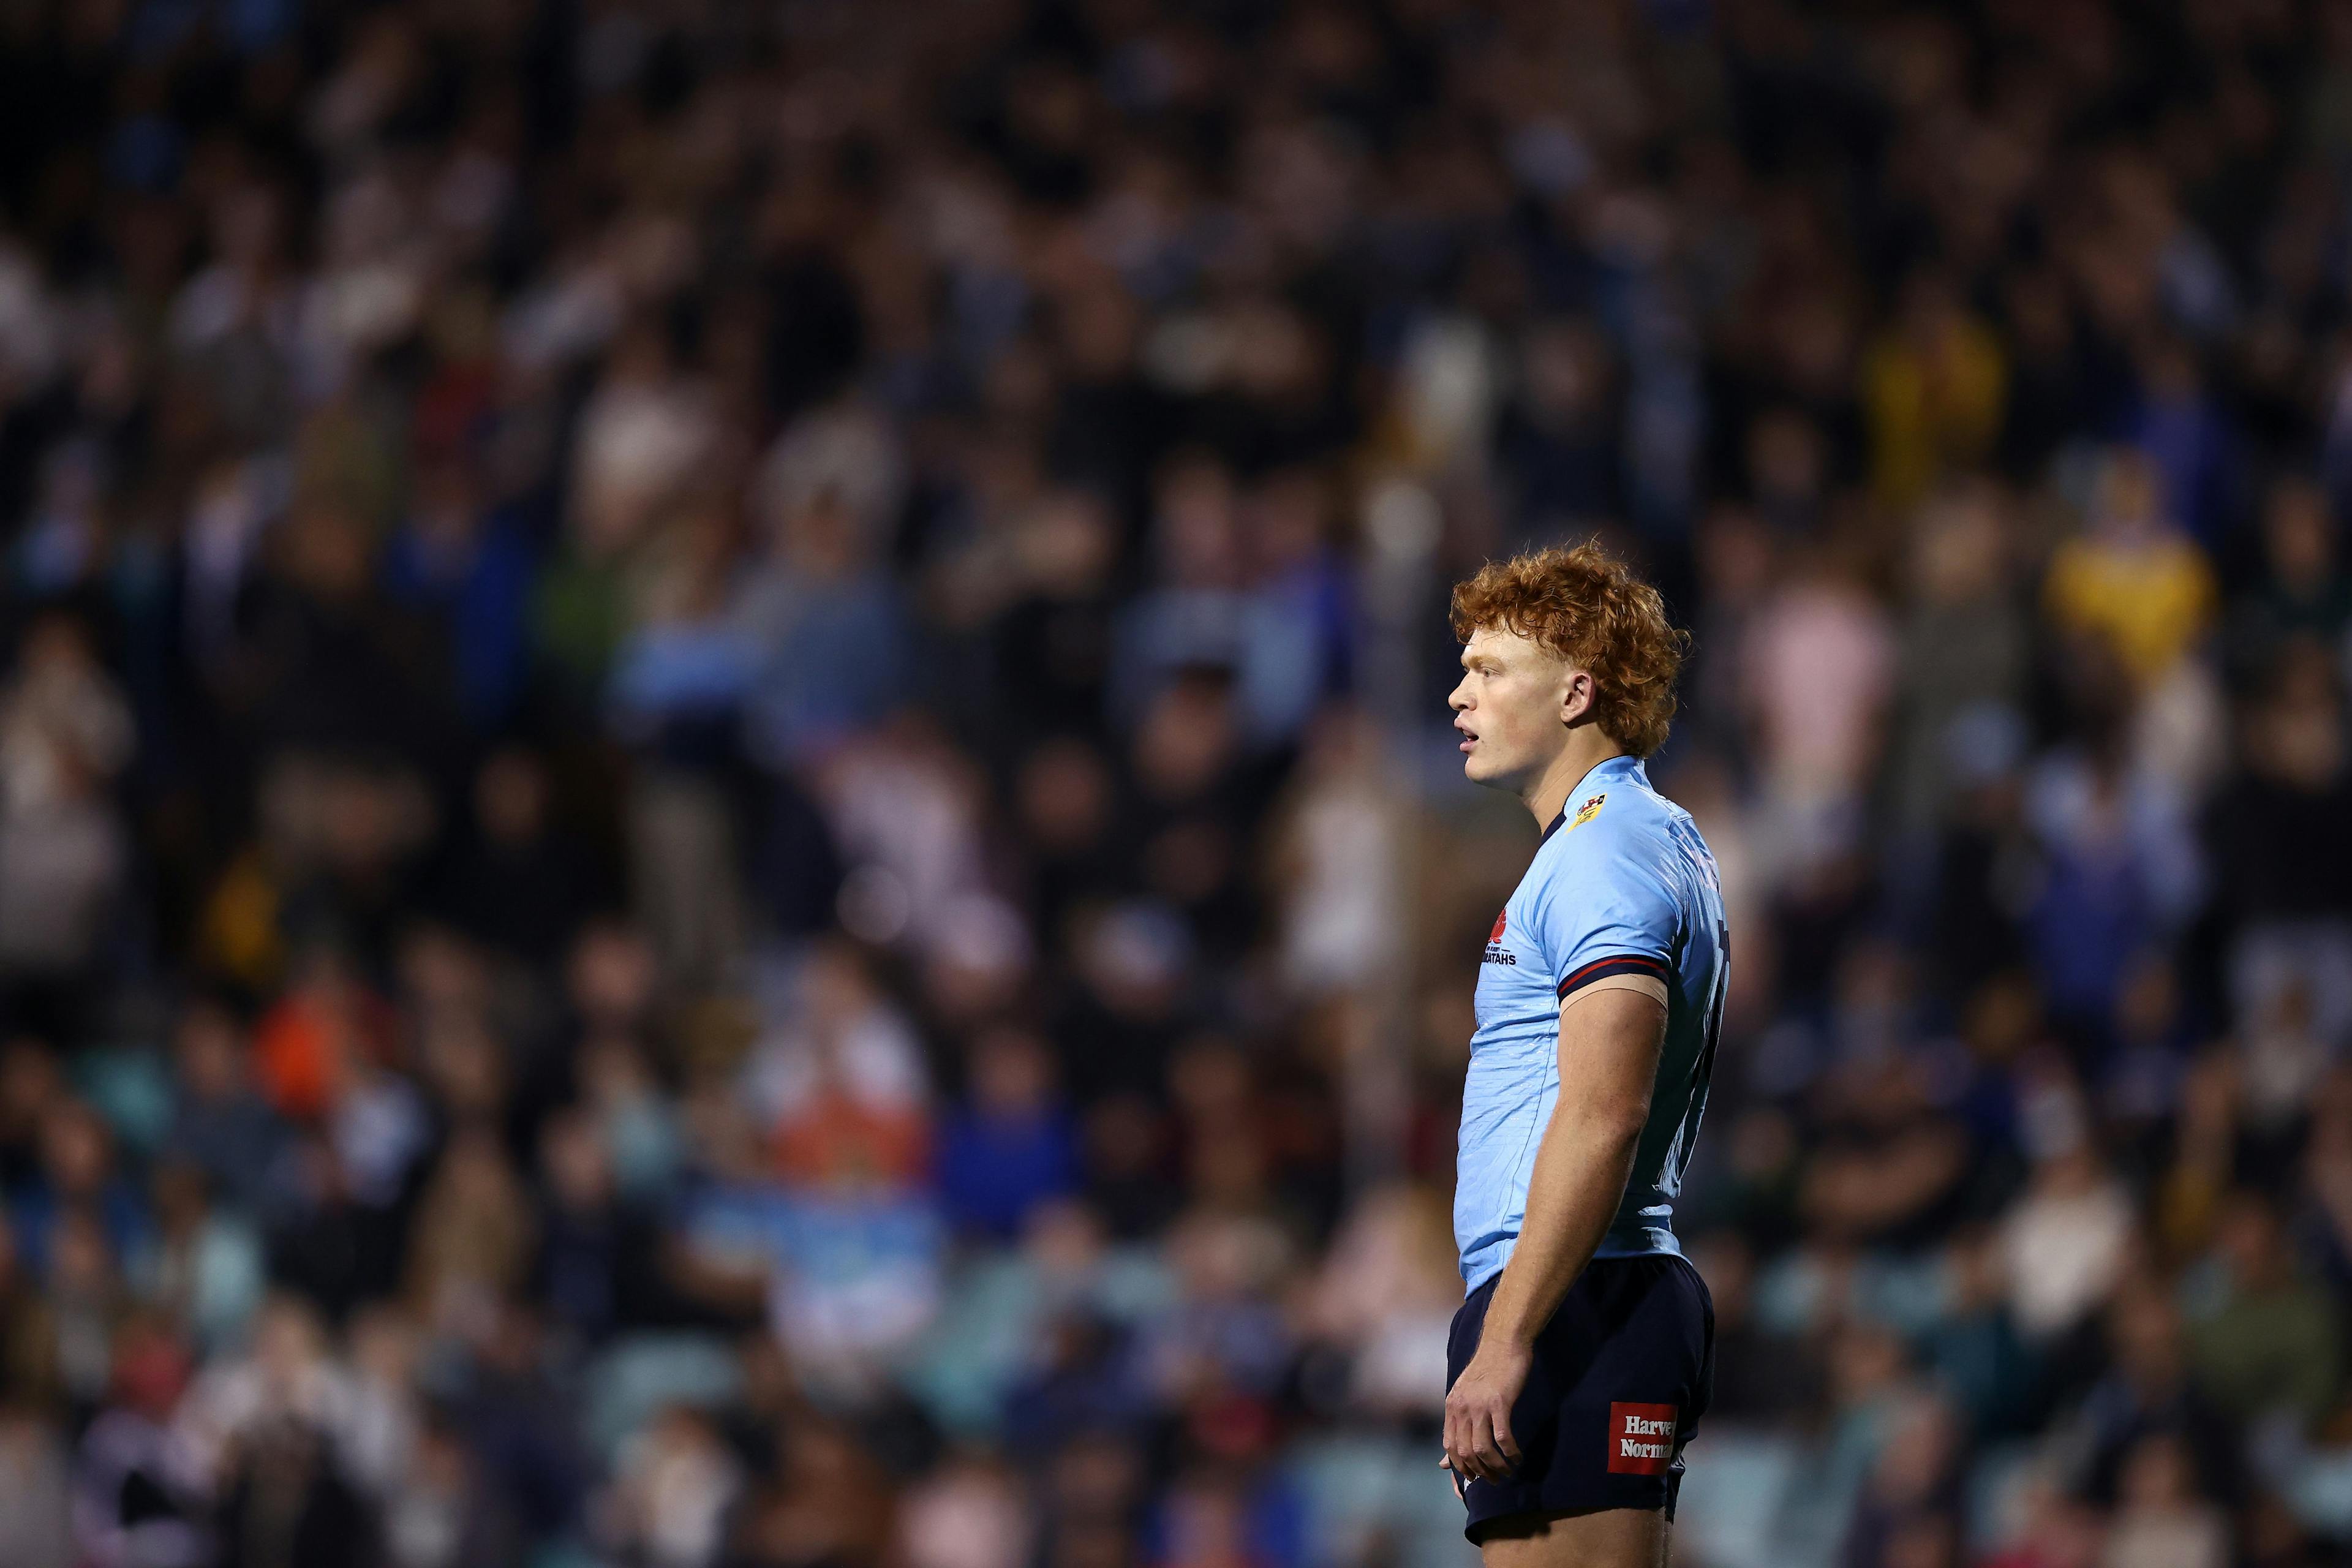 NSW Waratahs playmaker Tane Edmed is looking to make the flyhalf position his own as he reflects on a frustrating 2022. Photo: Getty Images